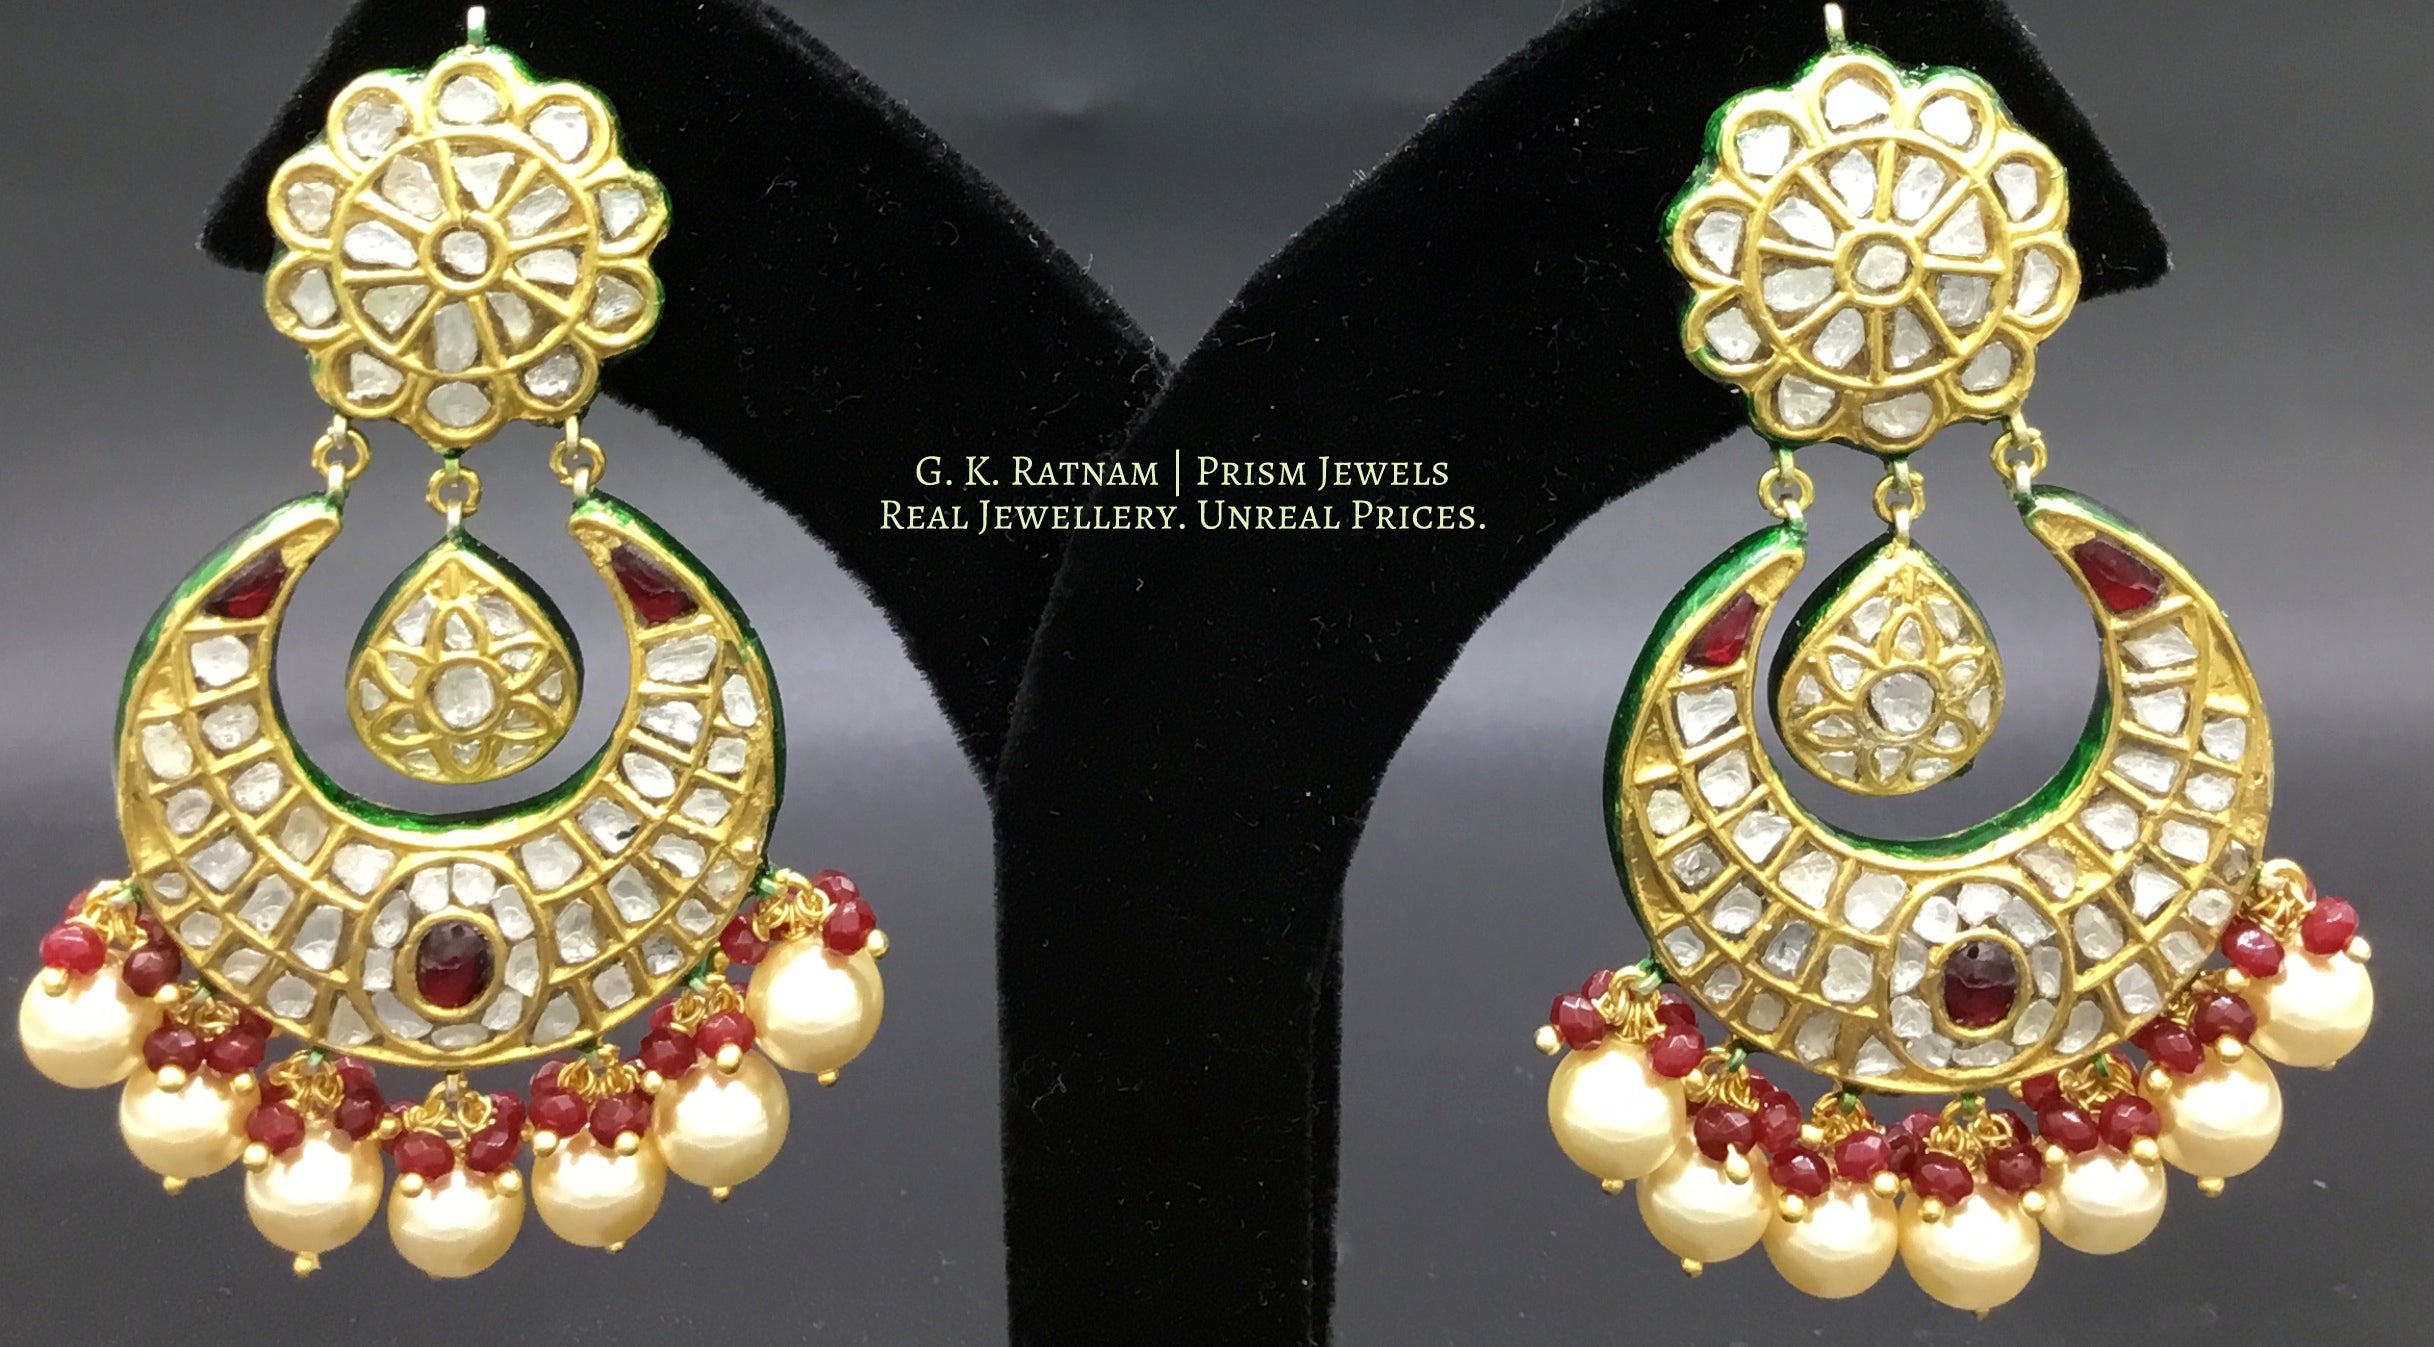 23k Gold and Diamond Polki Chand Bali Earring Pair with rubies and pearls - G. K. Ratnam